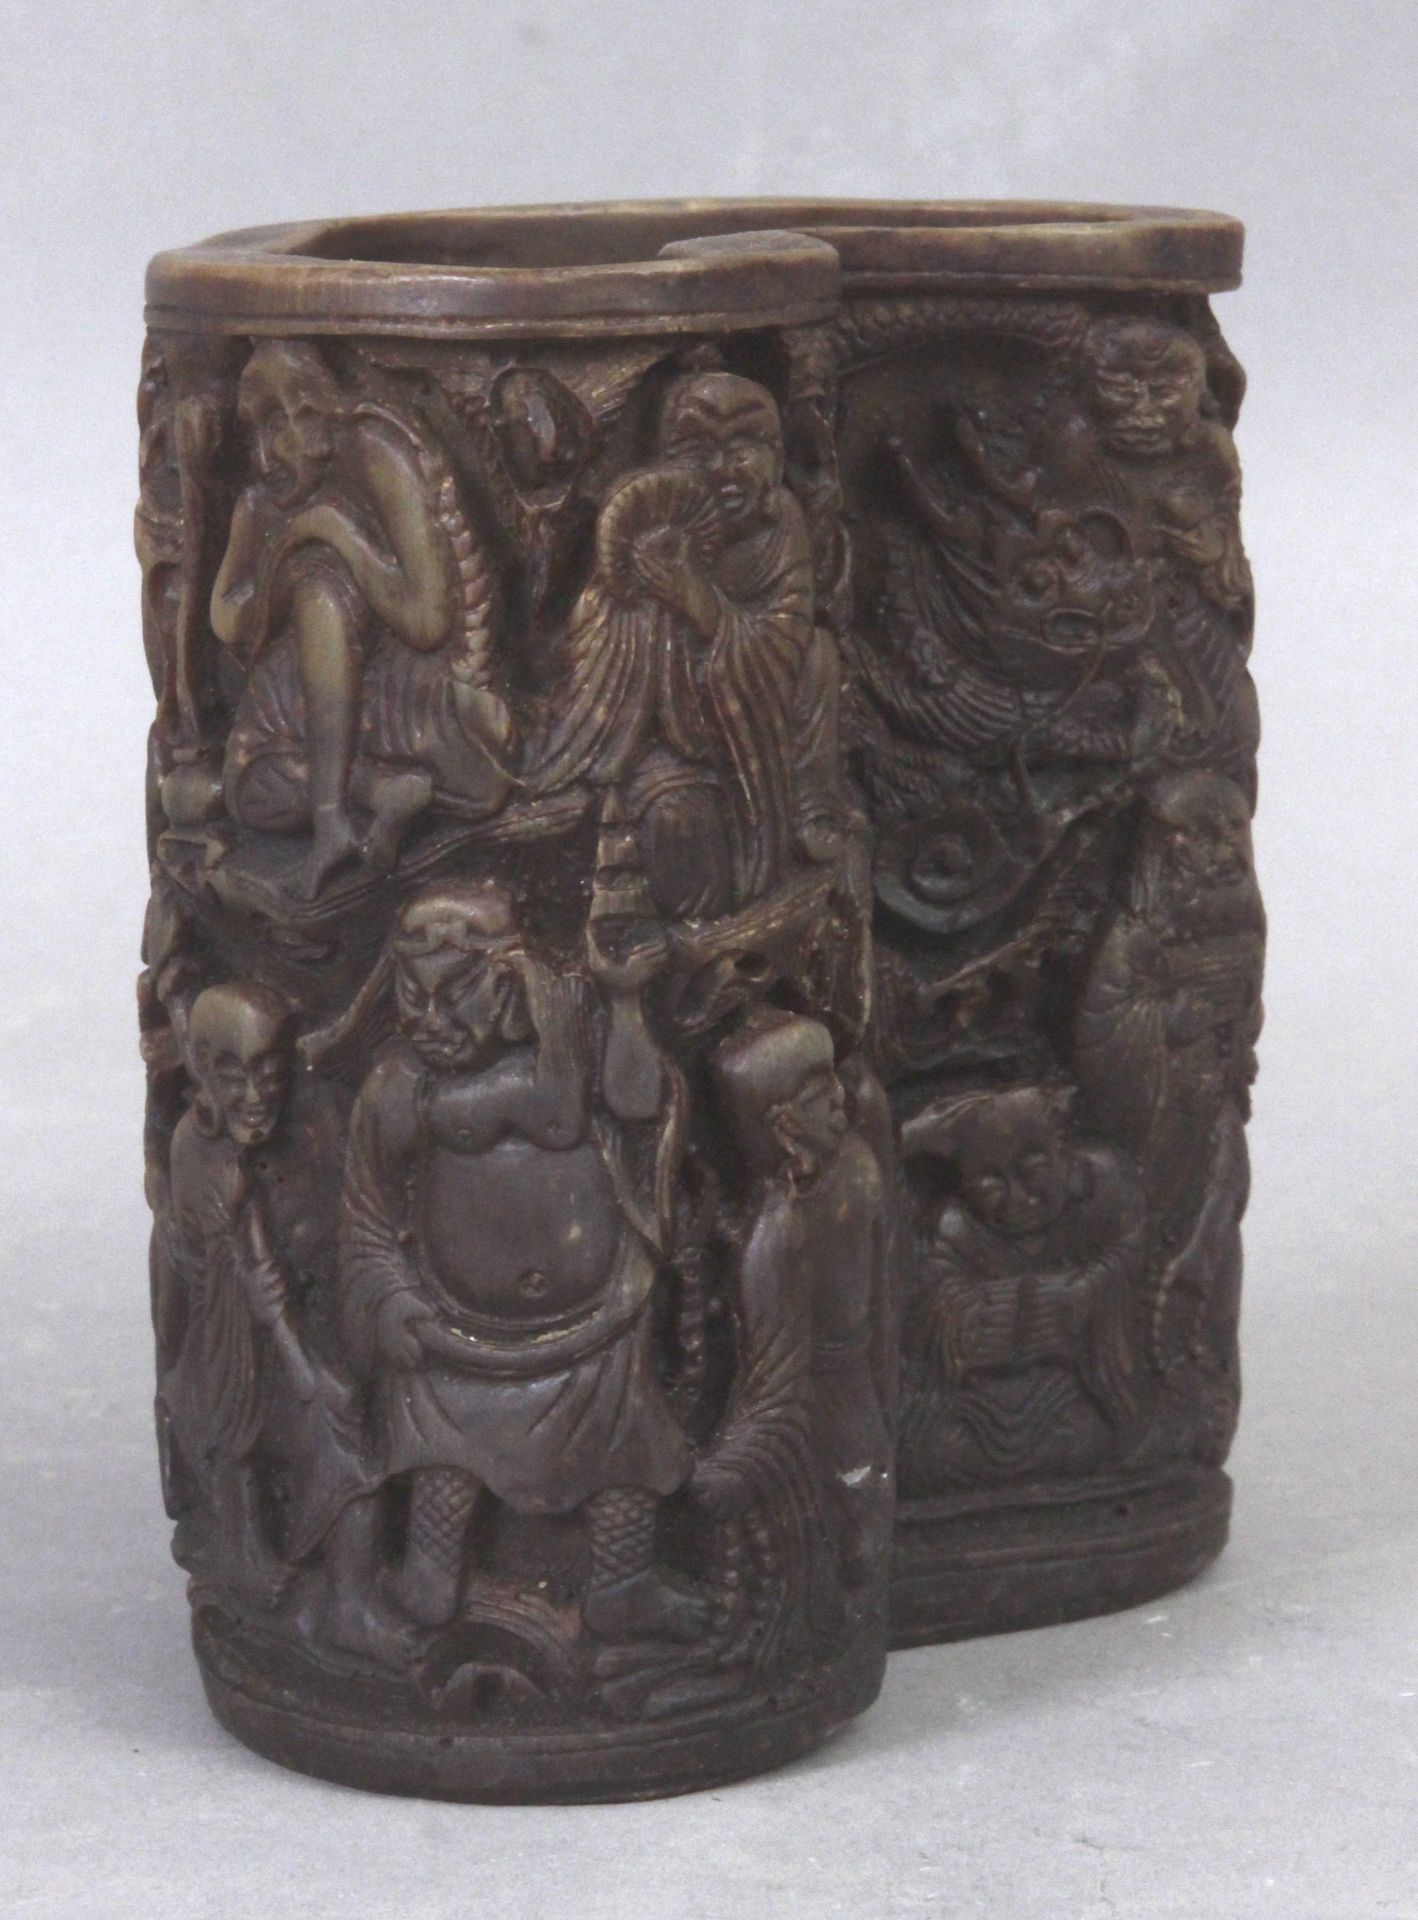 A carved rhino brush pot from Qing Dynasty - Image 3 of 4